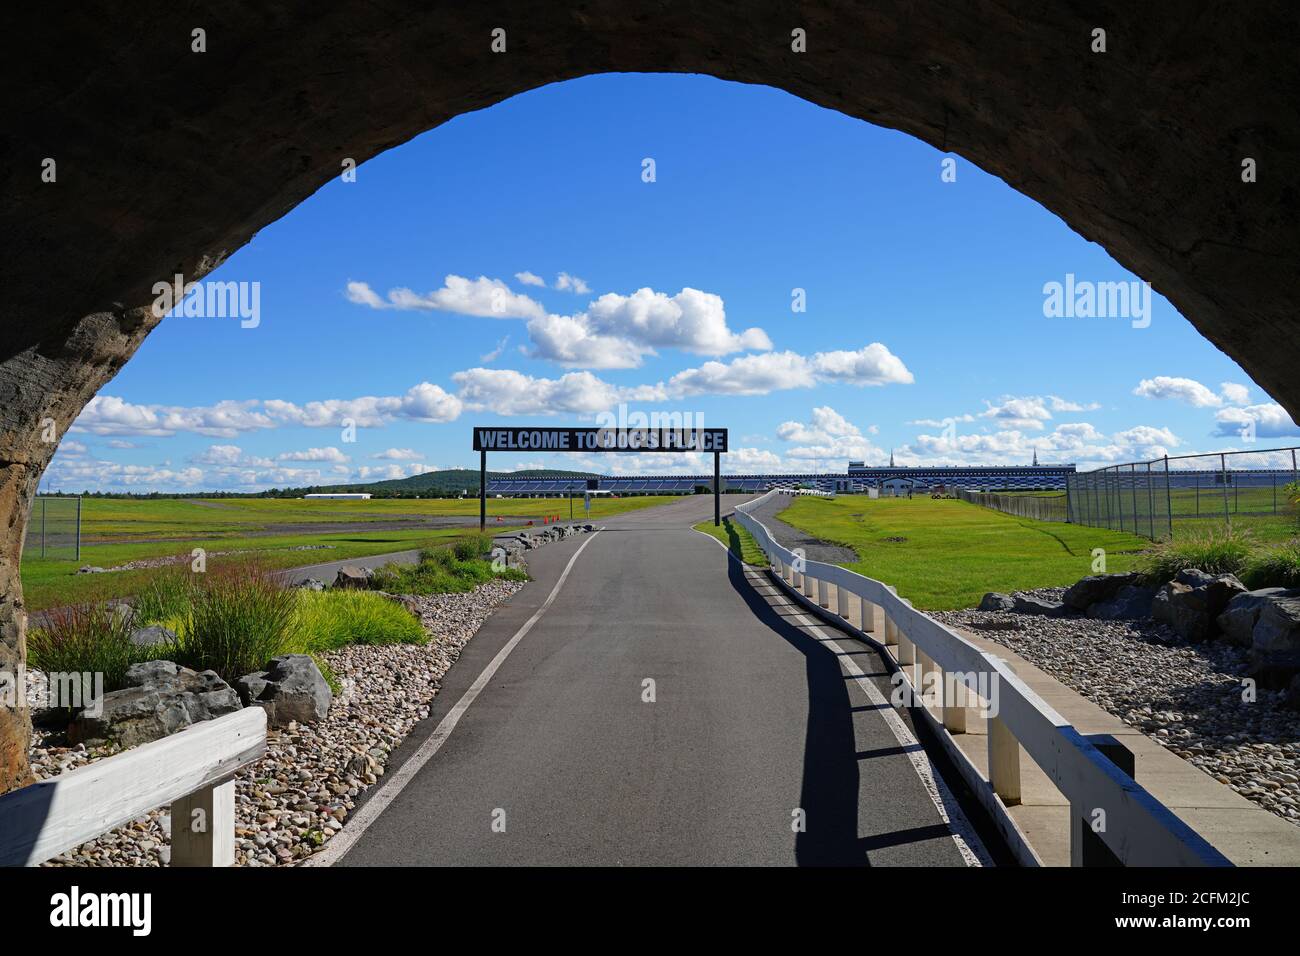 LONG POND, PA -30 AUG 2020- View of the Pocono Raceway (Tricky Triangle), a  superspeedway located in the Pocono Mountains in Long Pond, Pennsylvania  Stock Photo - Alamy